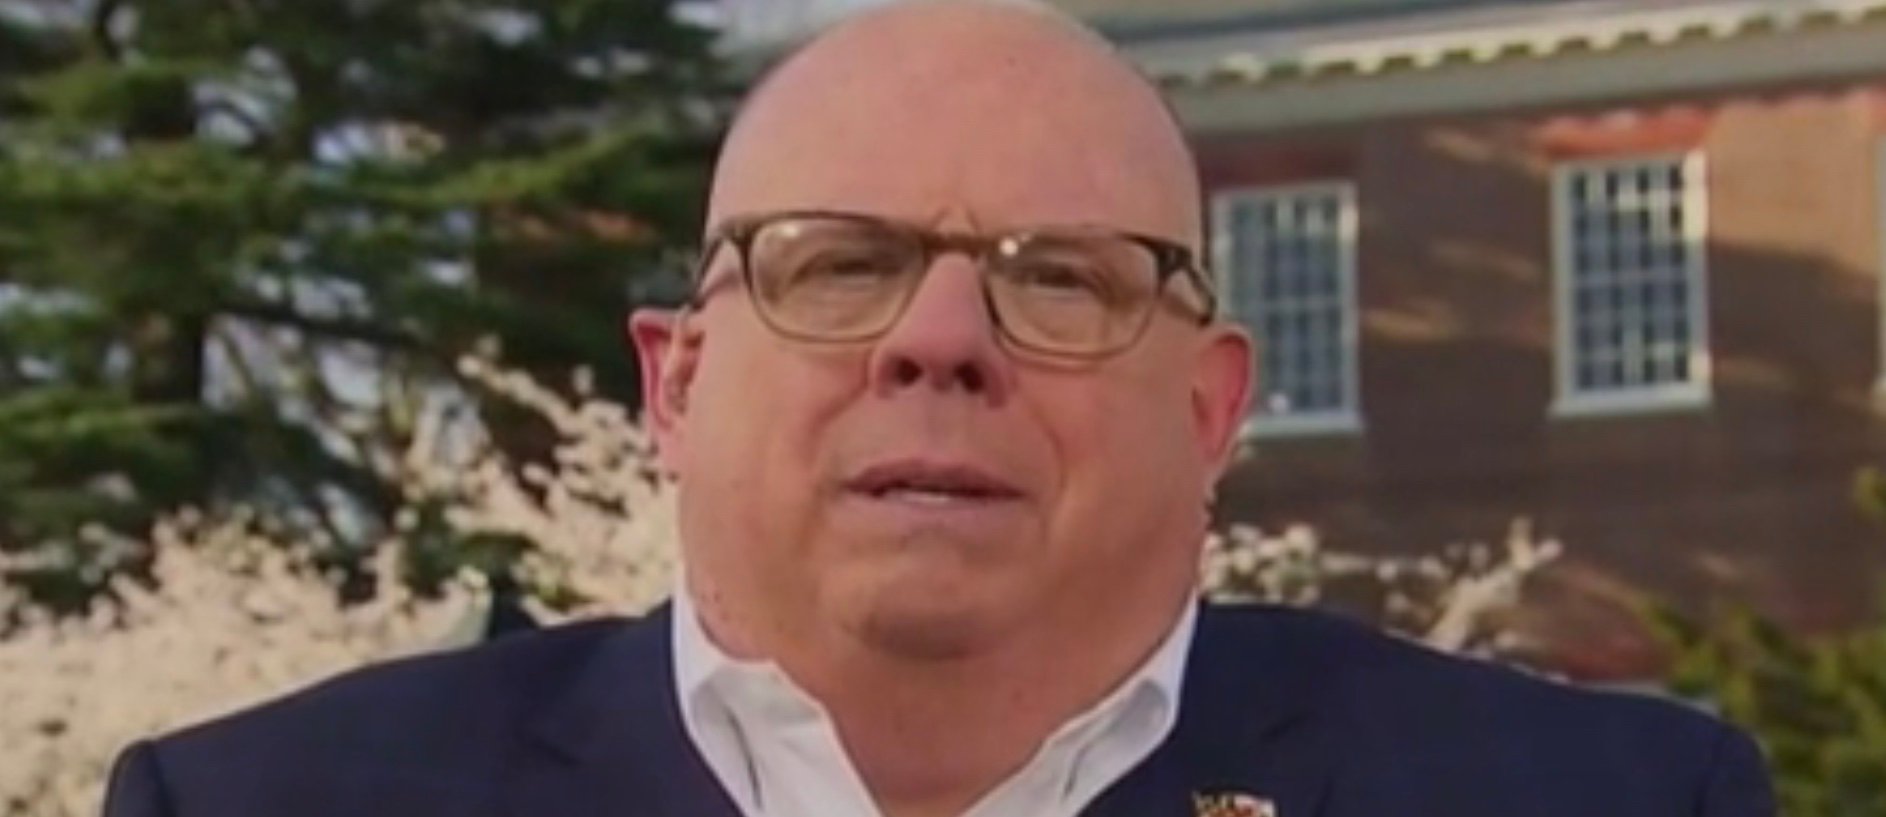 Republican Maryland Gov. Larry Hogan discusses his state’s response to the coronavirus pandemic on NBC News’ “Meet the Press,” March 22, 2020. NBC News screenshot.